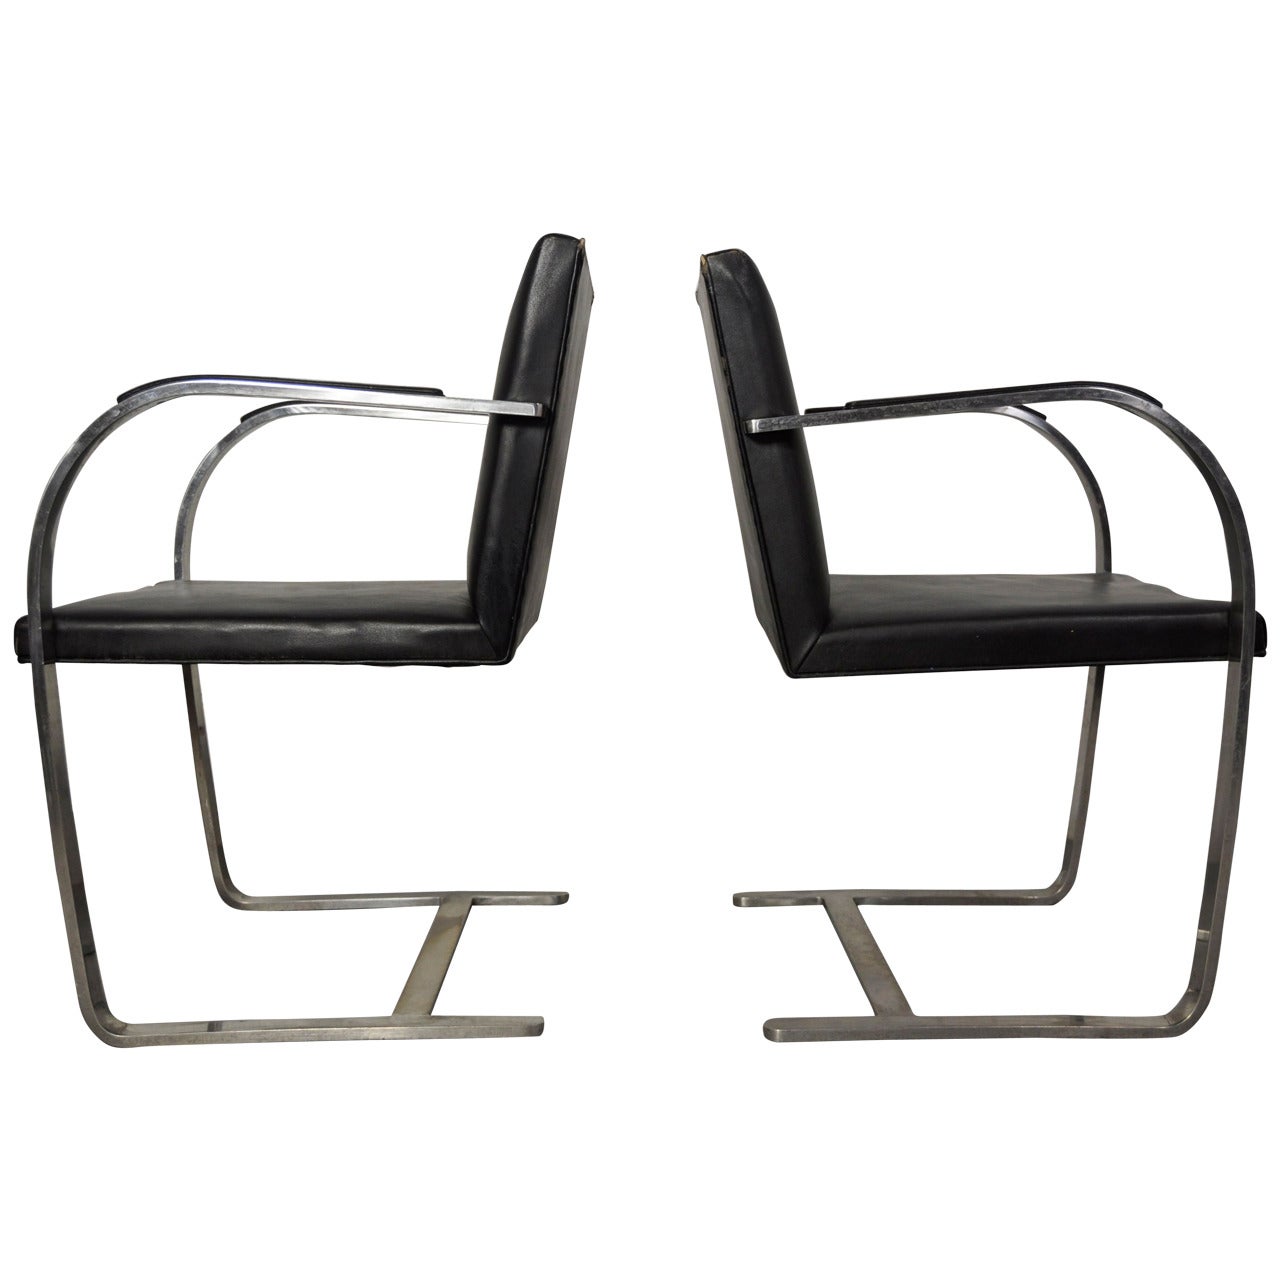 Vintage Pair of Knoll Brno Chairs For Sale